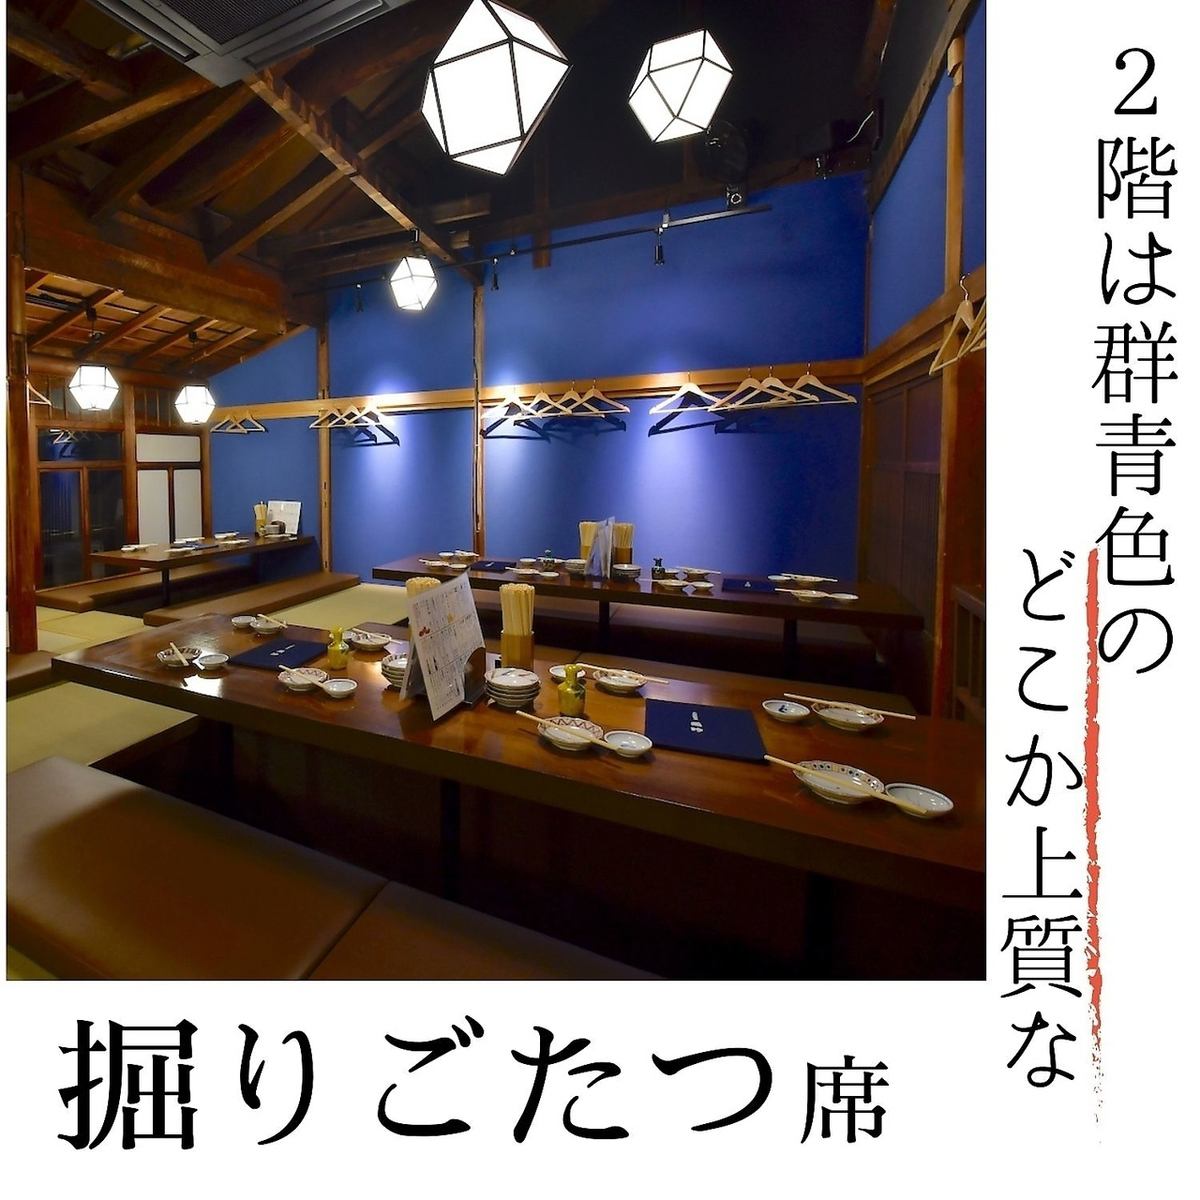 We have a wide range of private rooms available for 15, 18, and 38 people! Ideal for company parties♪